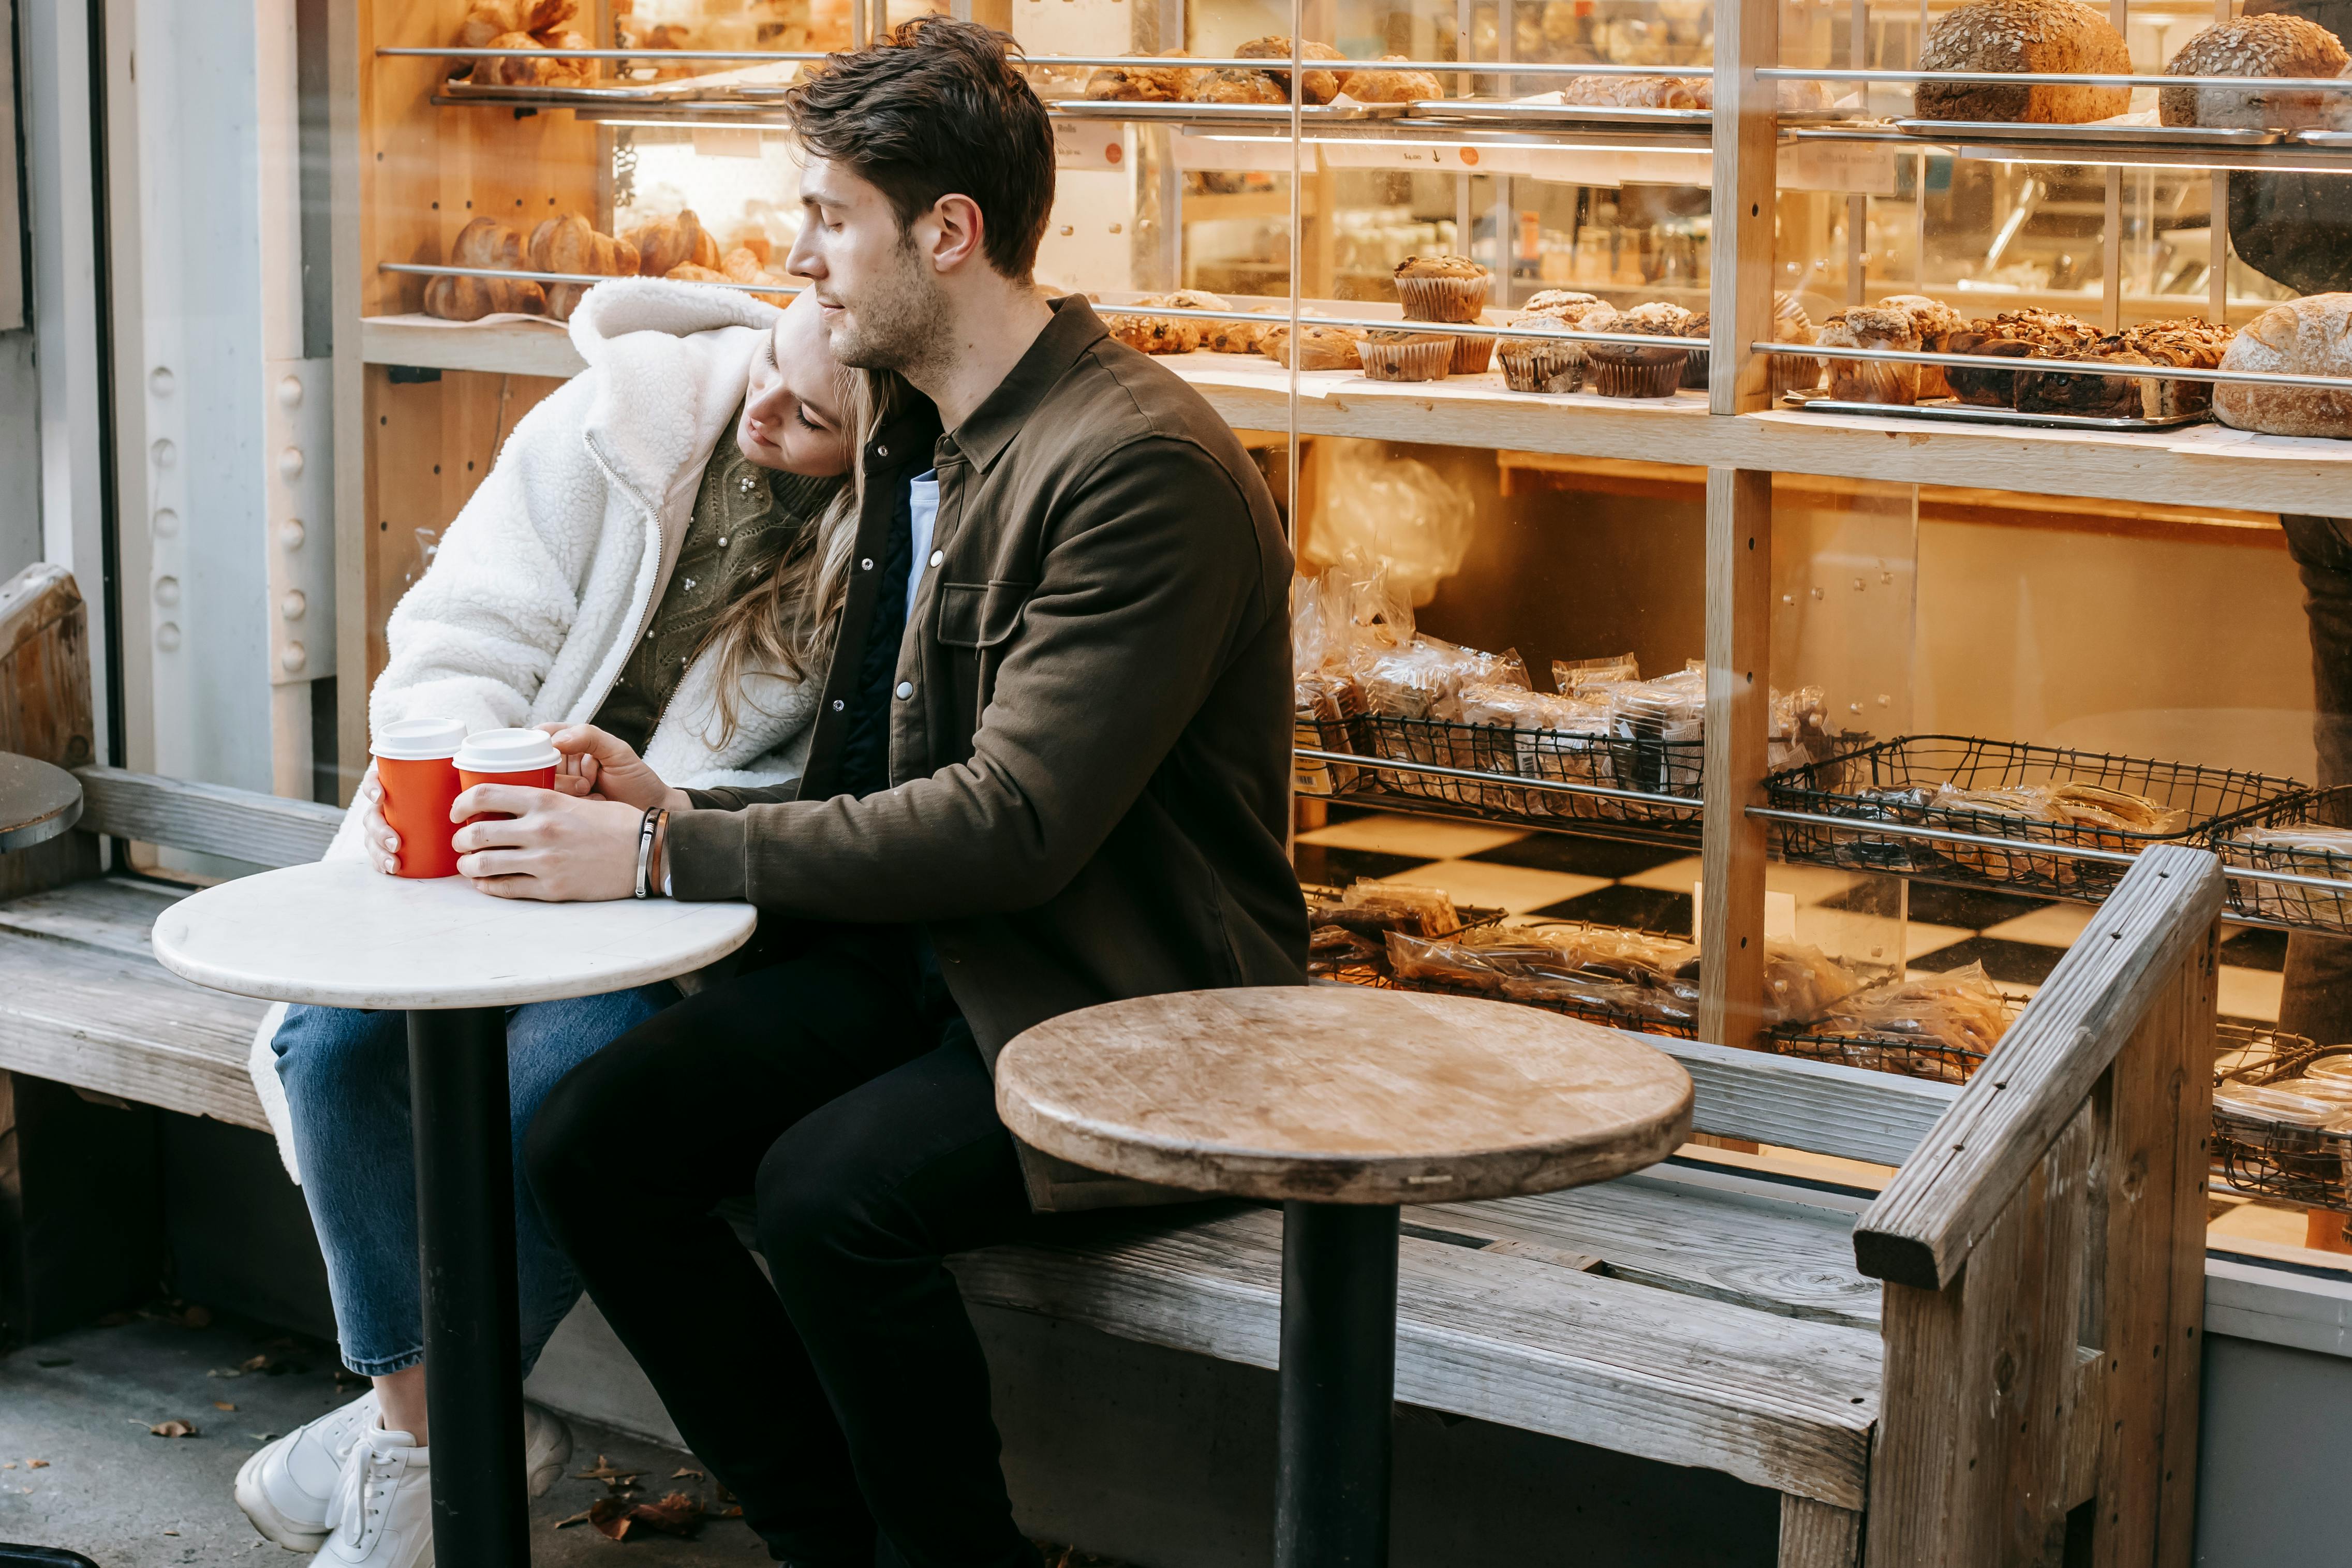 A couple at a cafe | Source: Pexels